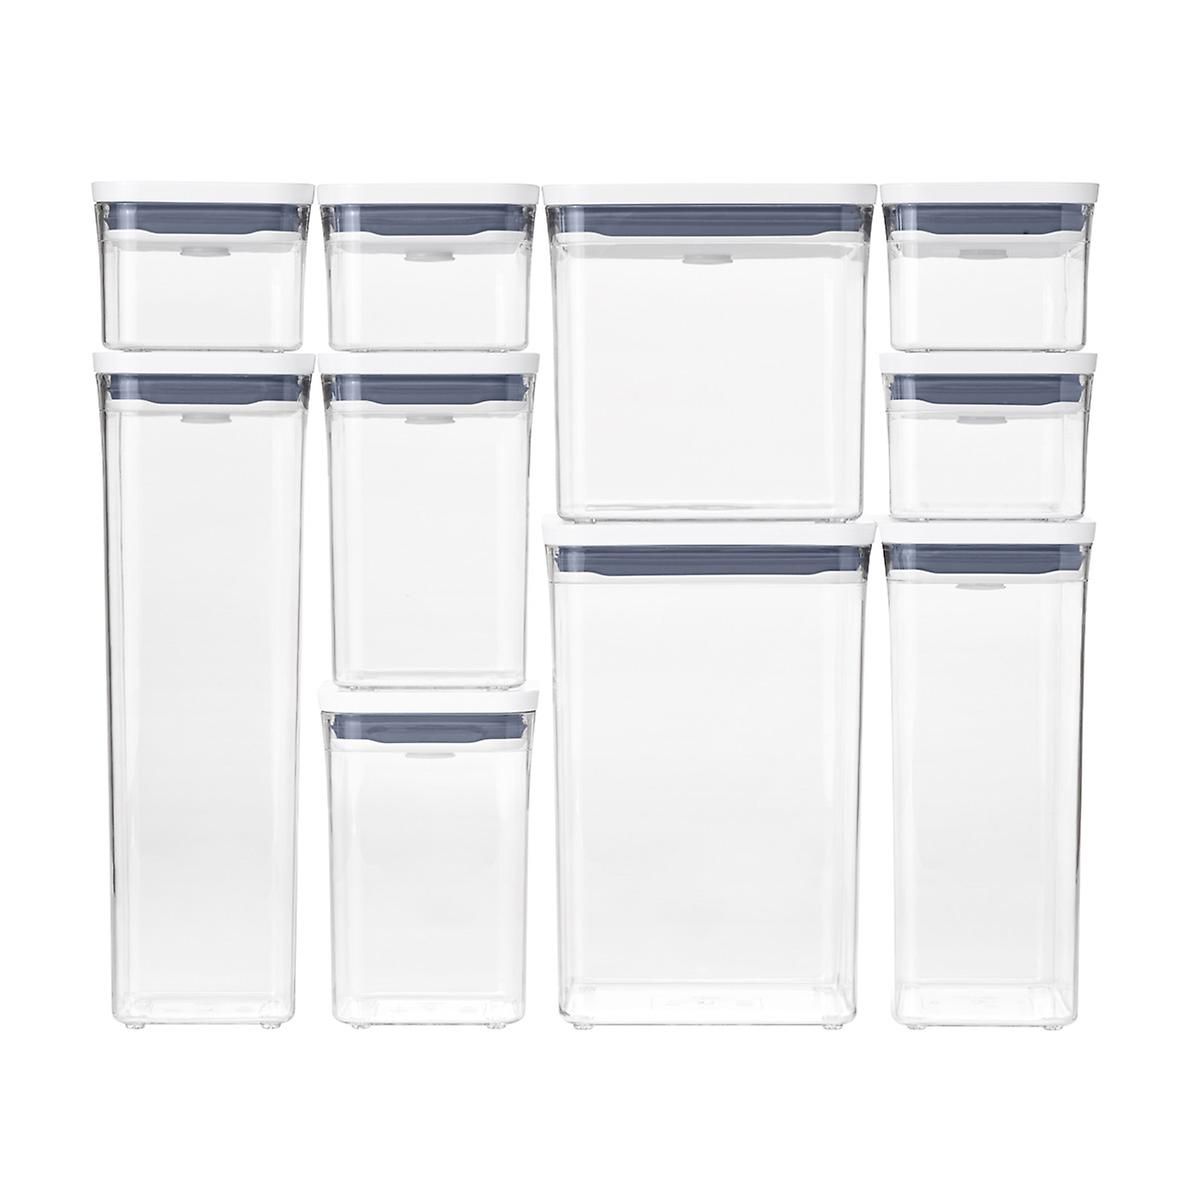 OXO Good Grips POP 10-Piece Canisters | The Container Store